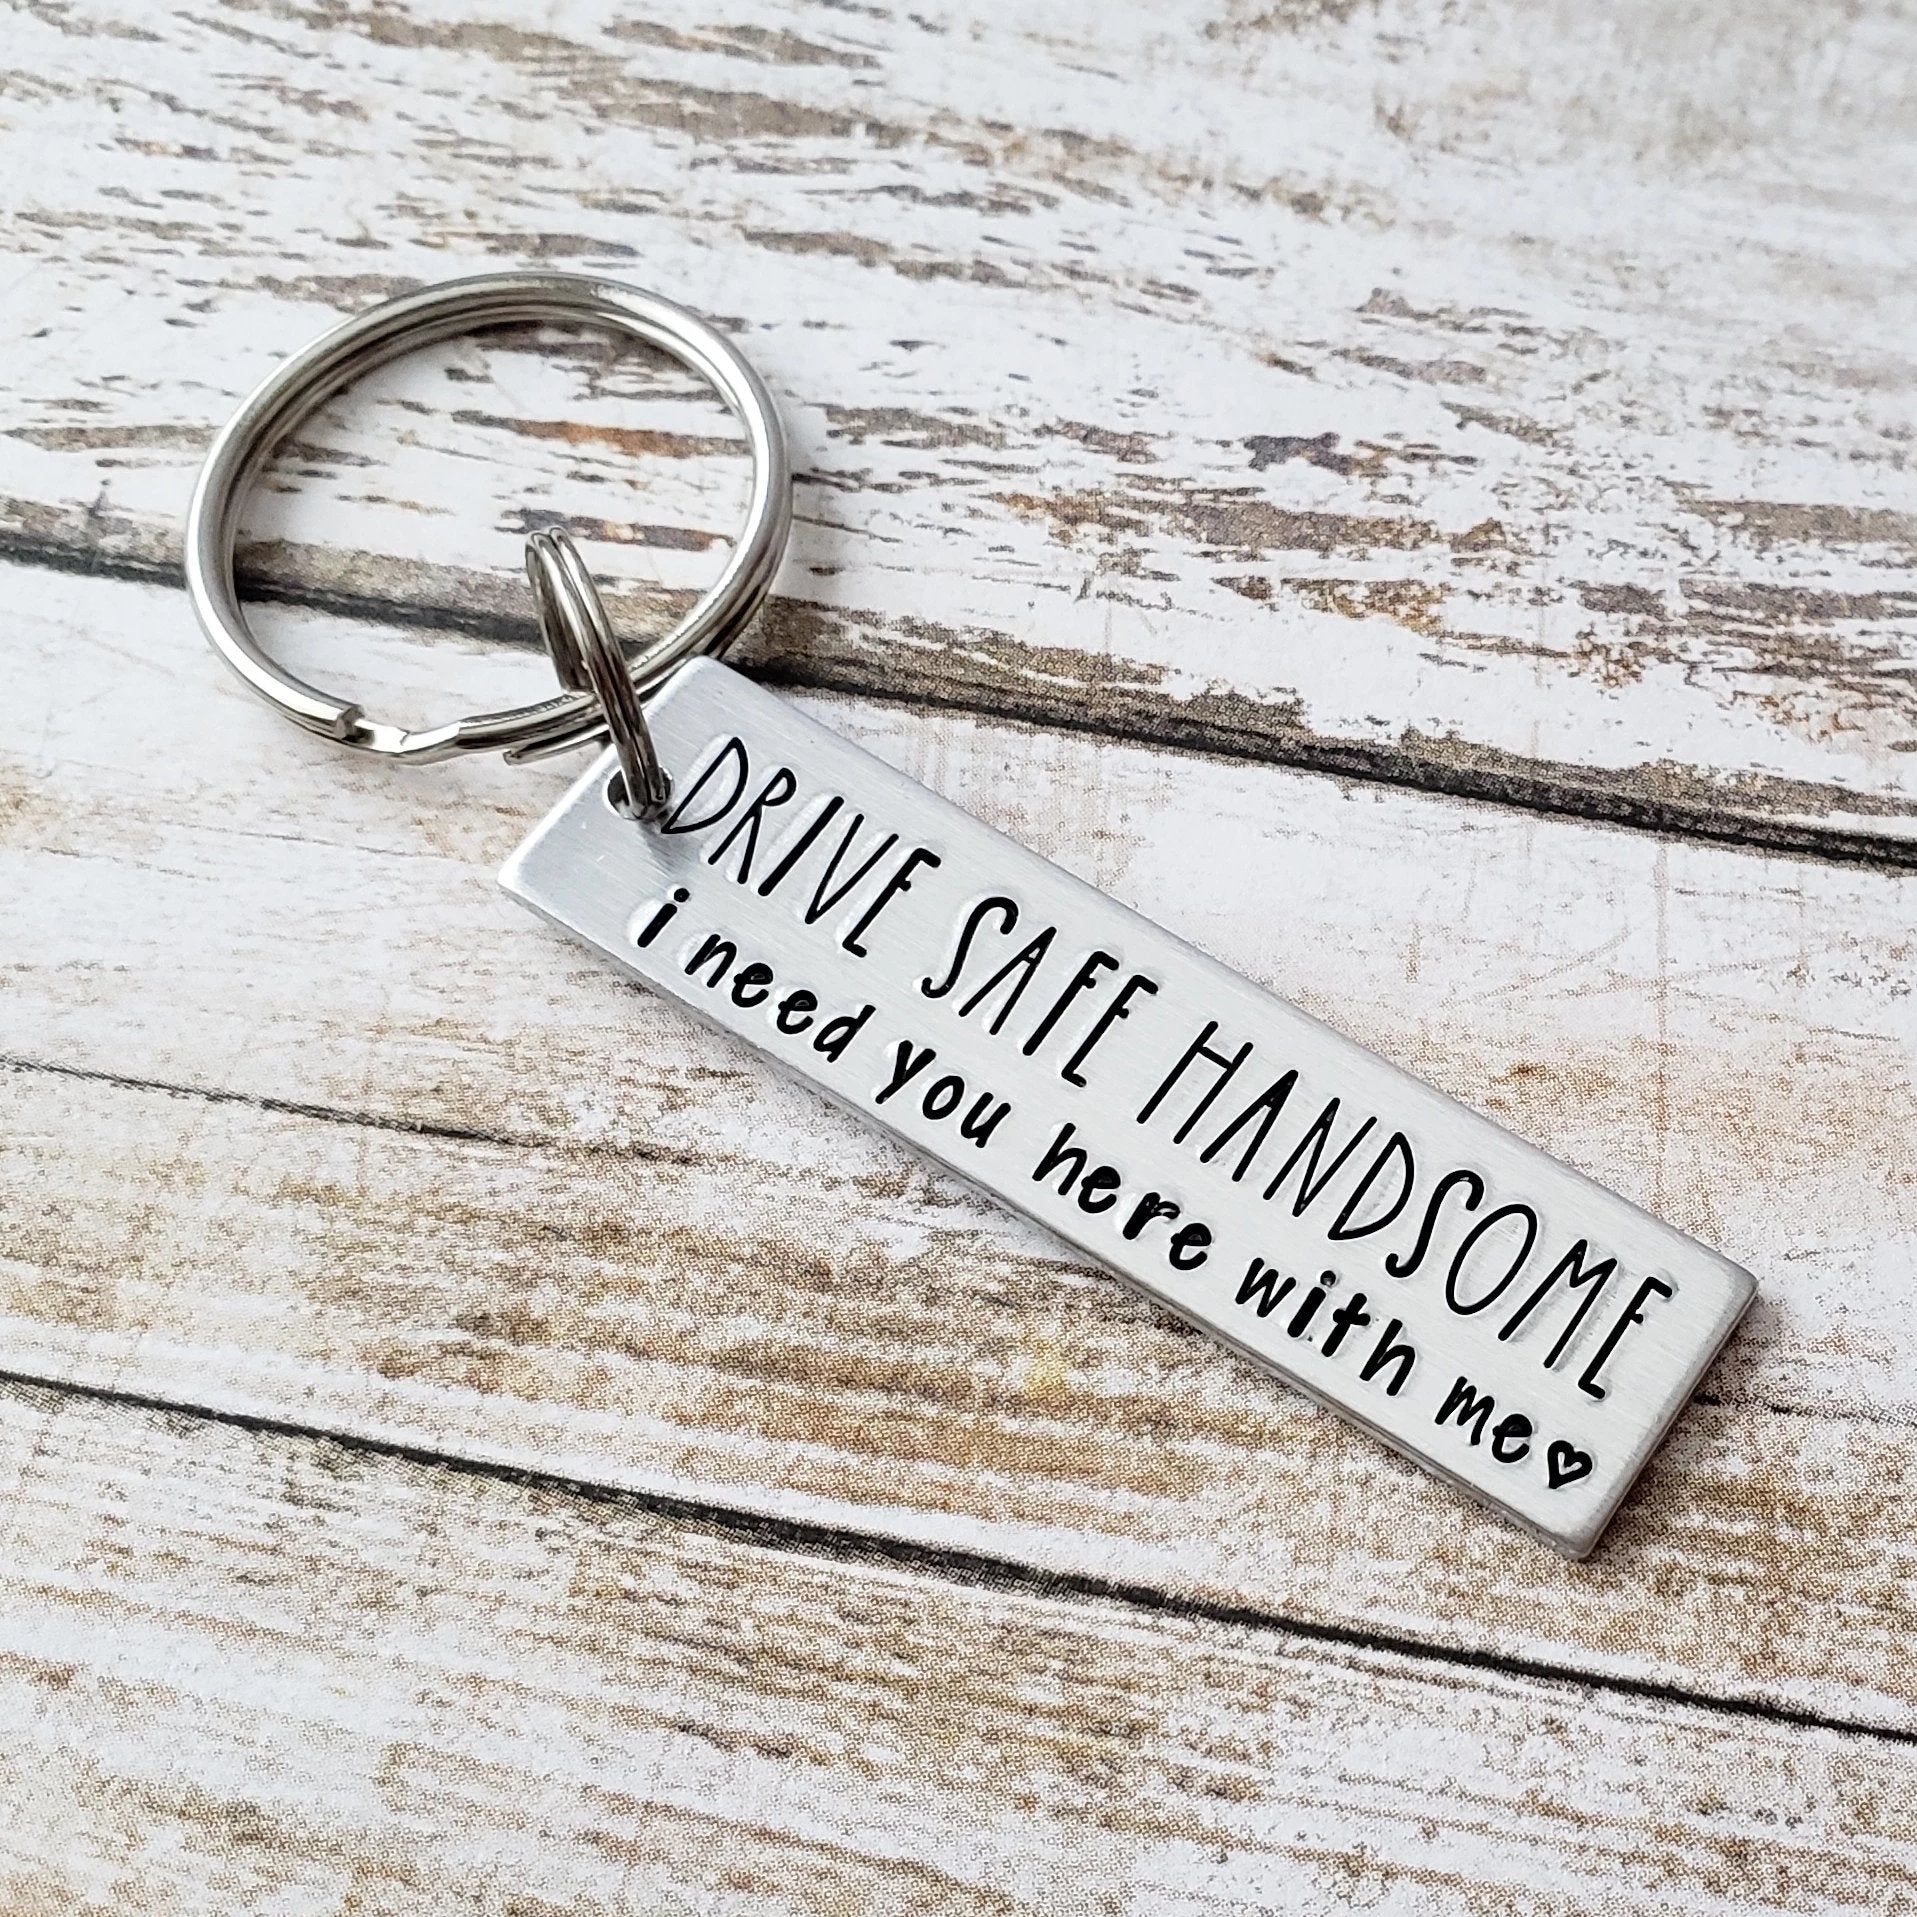 Candidly K Handmade Drive Safe I Need You Here with Me Key Chain